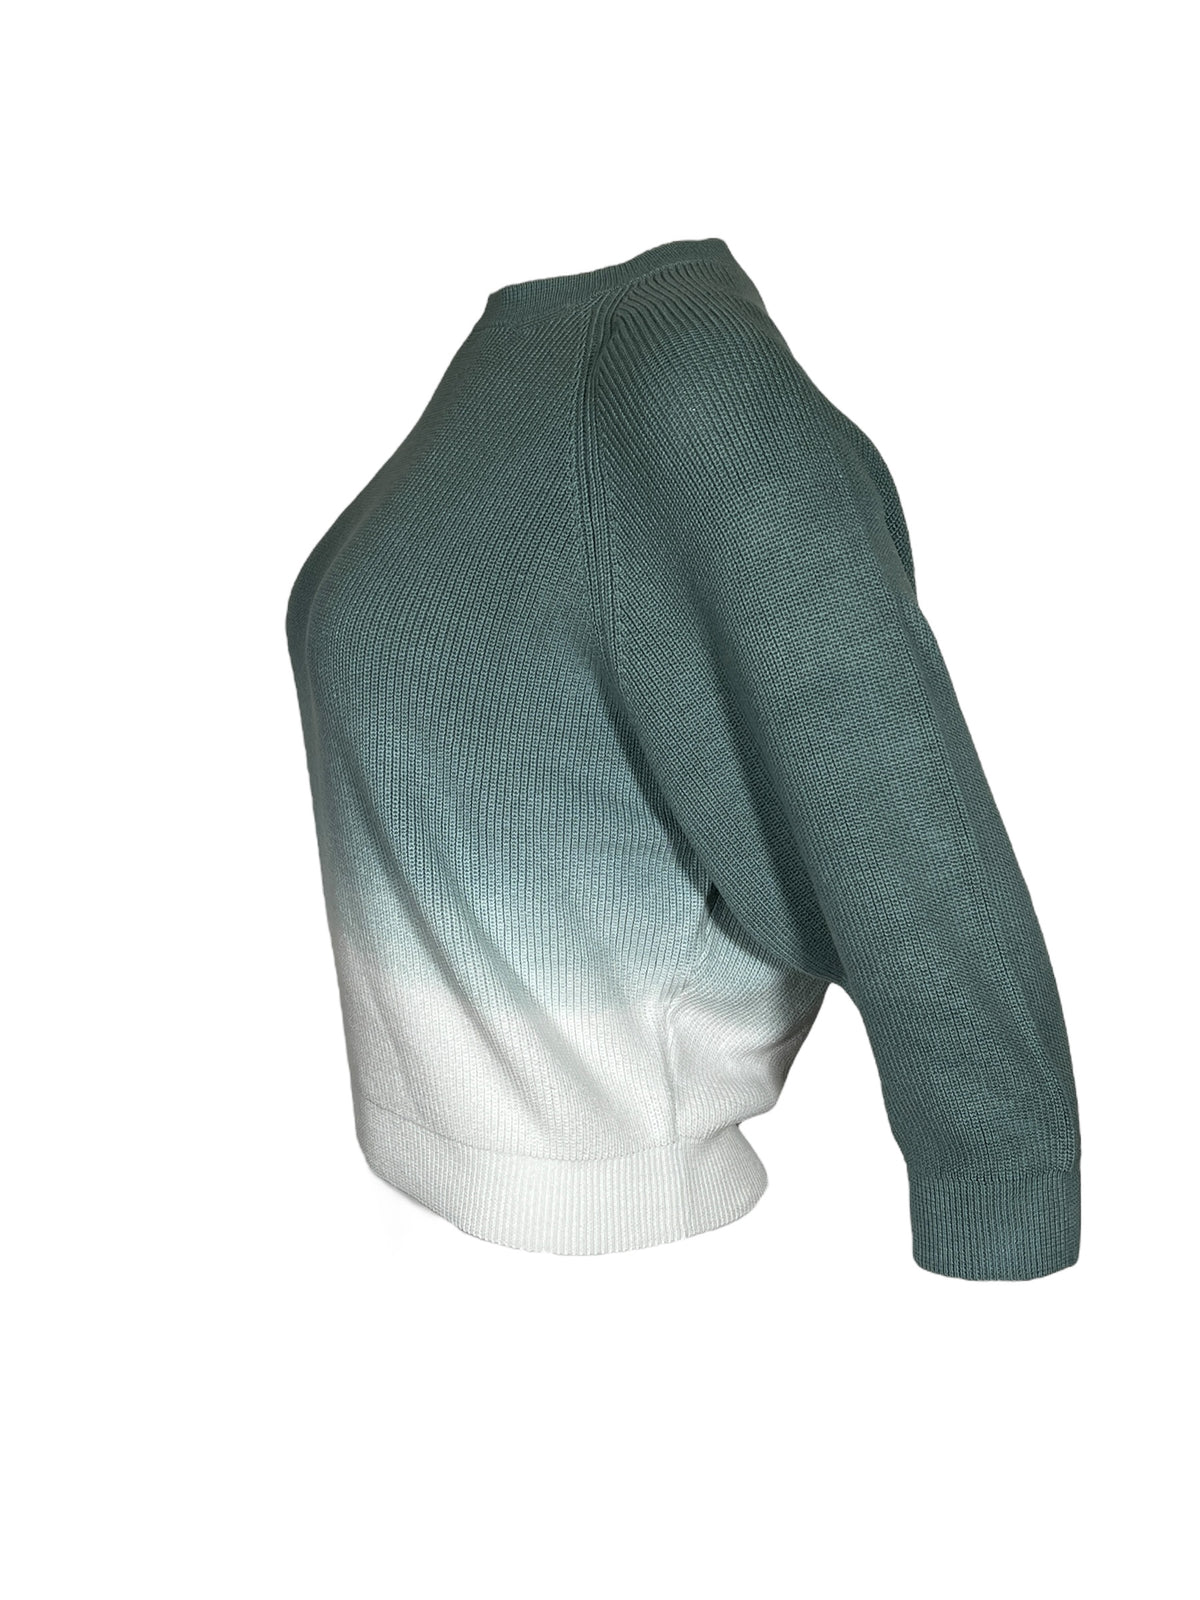 PESERICO OMBRE SWEATER - DEEP SAGE